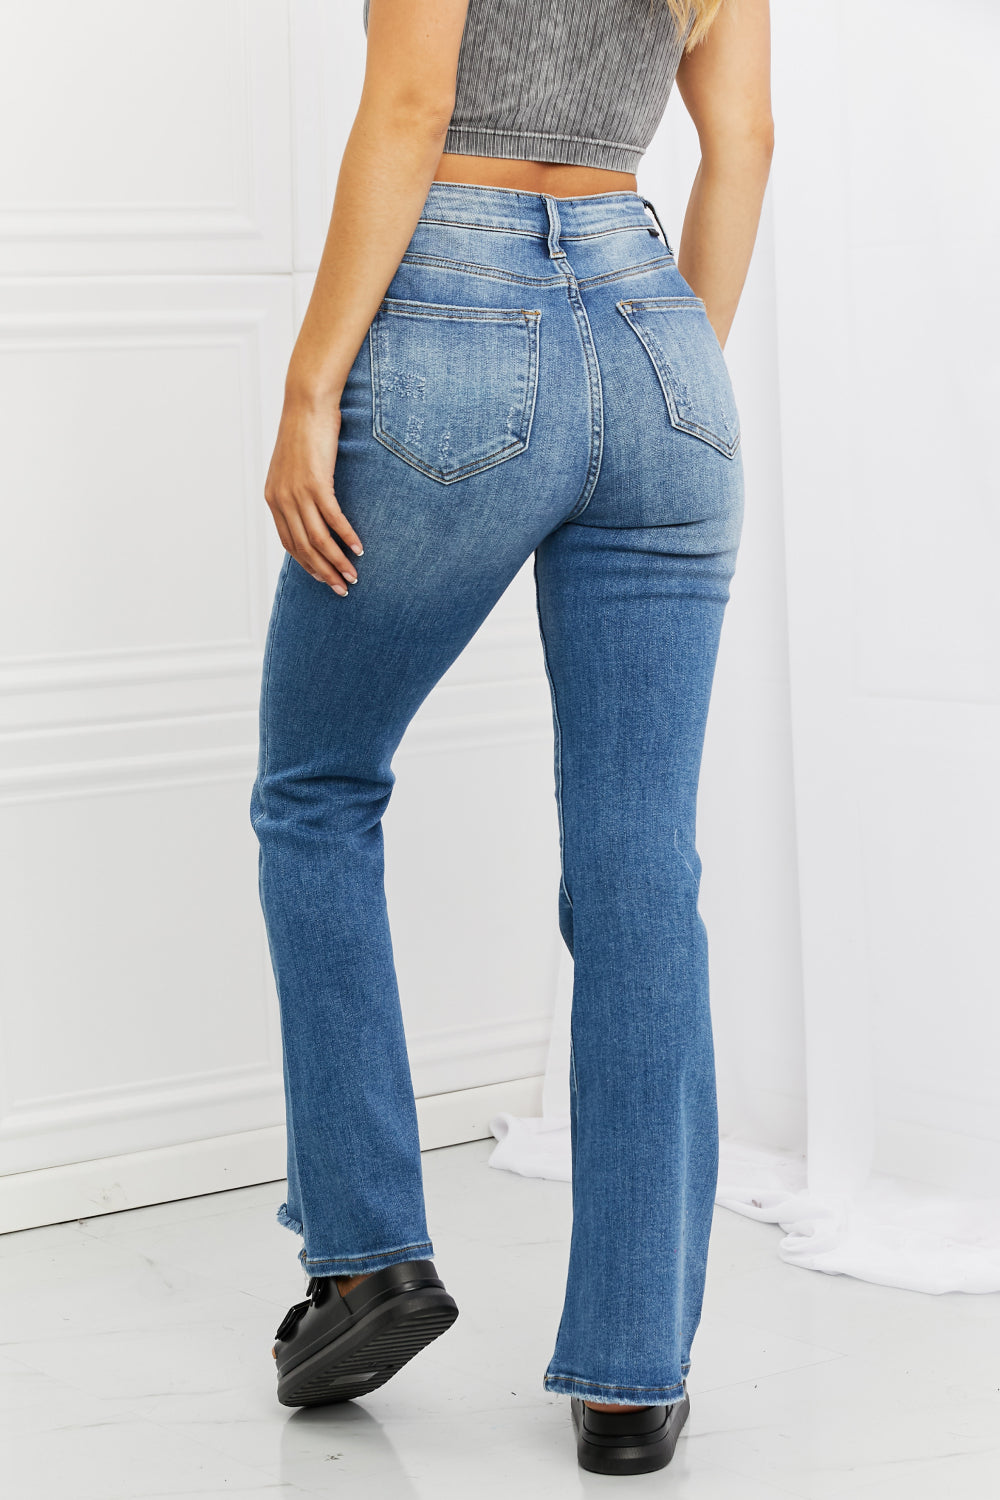 RISEN Full Size Iris High Waisted Flare Jeans - Cheeky Chic Boutique